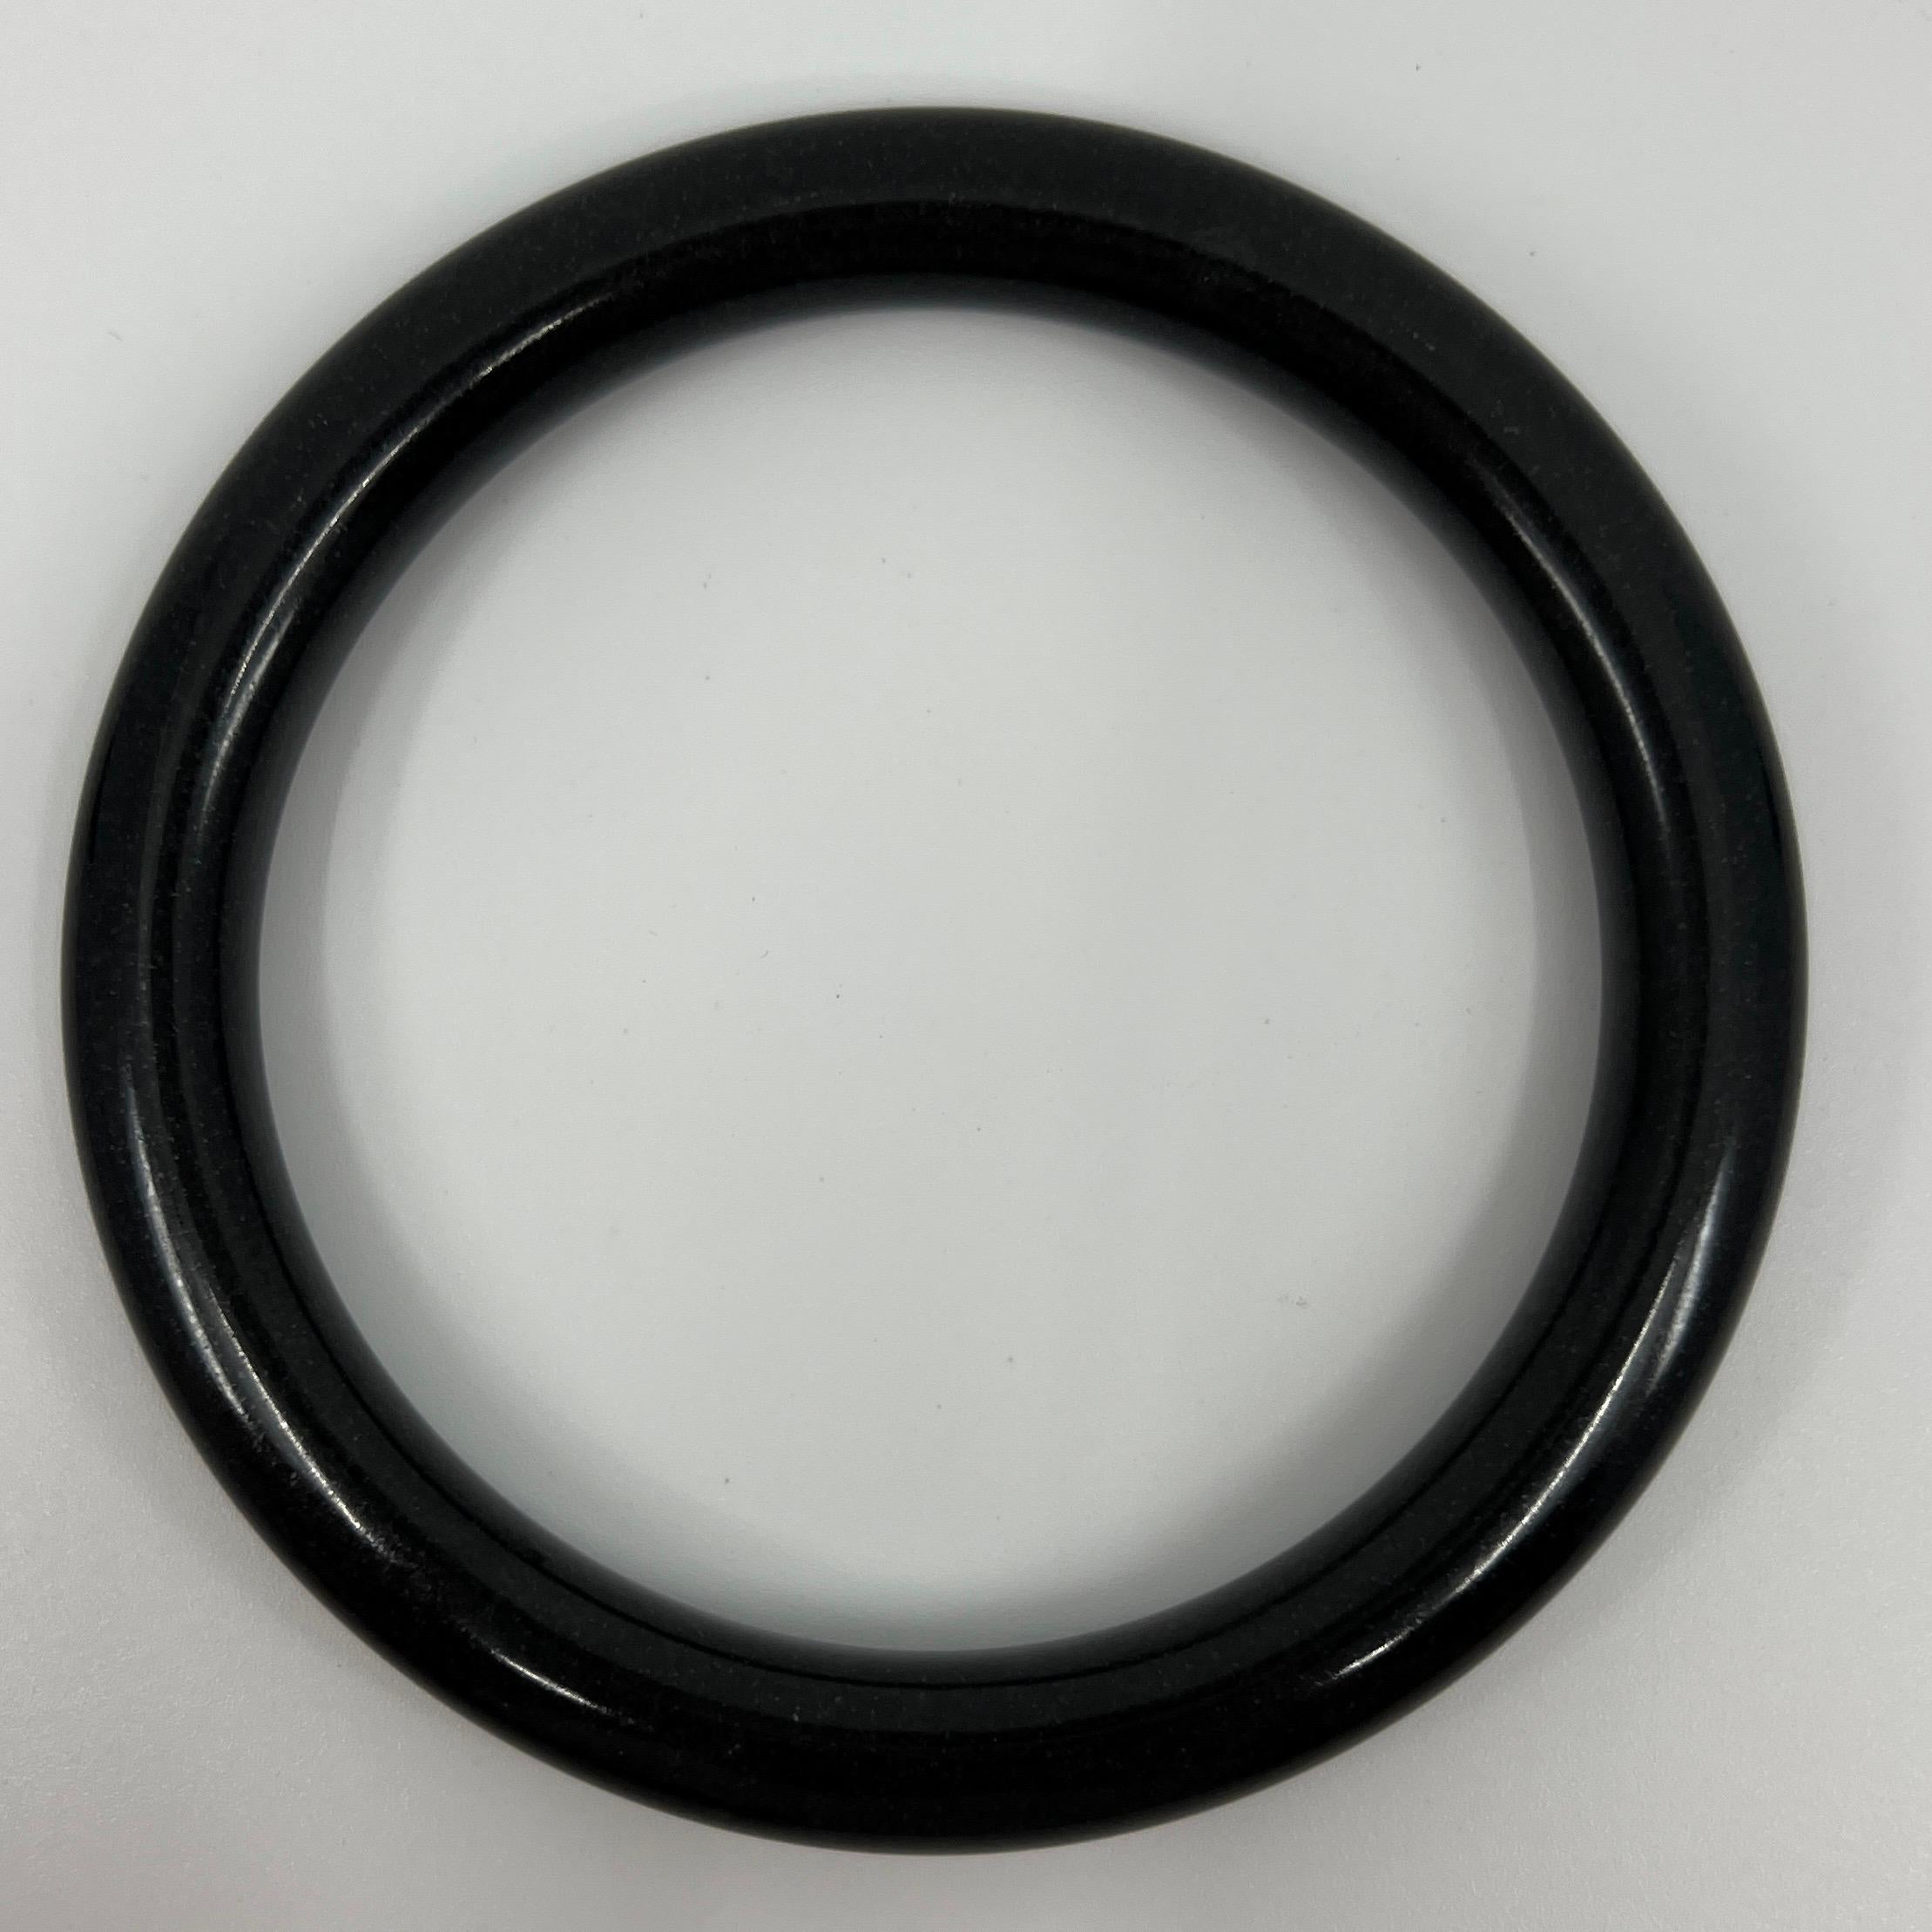 AIG Certified Natural Black Jade Bangle Bracelet 53.1g

Has a beautiful rich black colour with an excellent polish and lustre with no cracks or chips.

This is a treated jade bracelet, as to be expected of such a large piece in this price